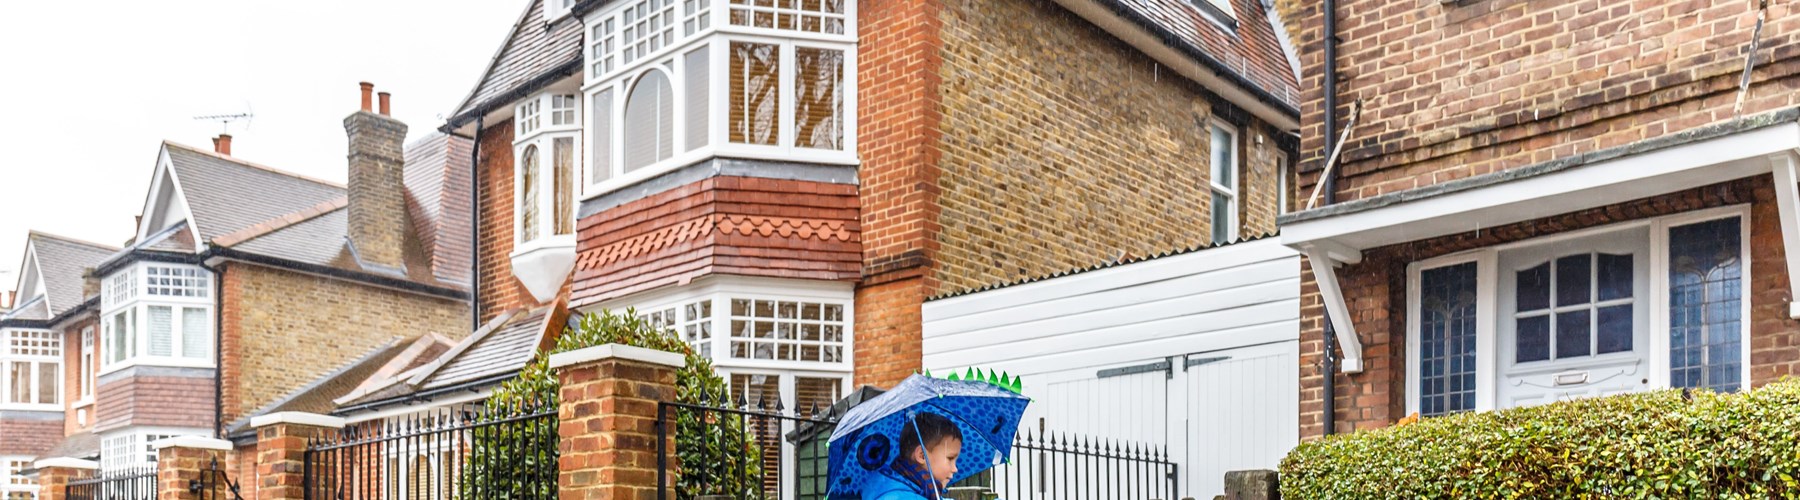 Kid with an umbrella going into his home